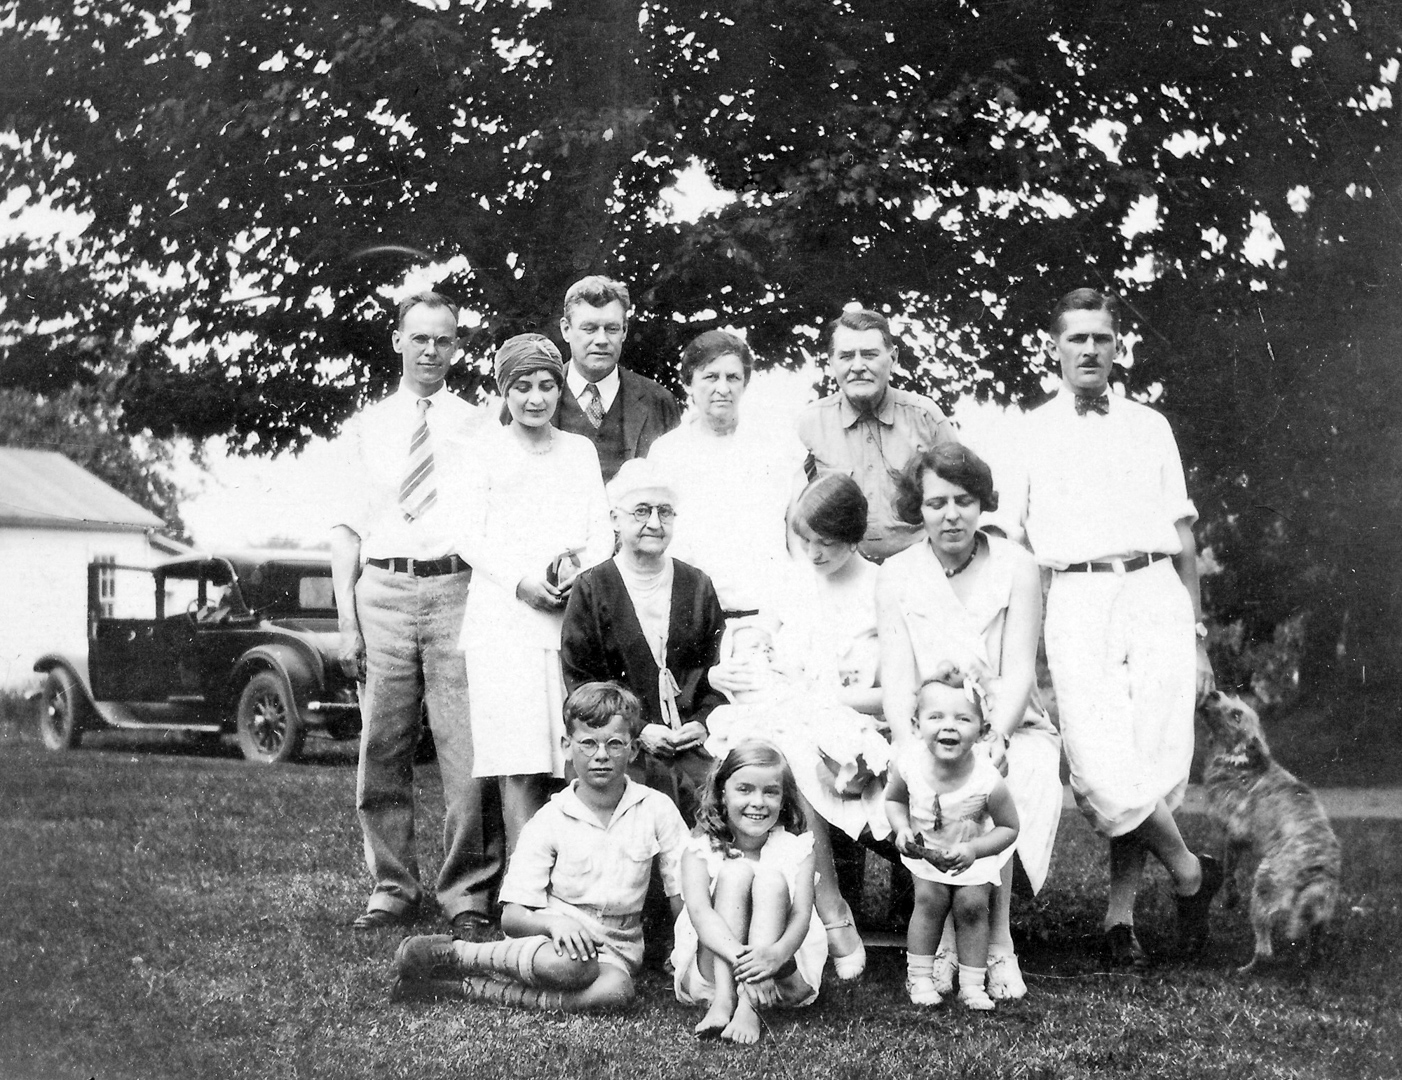 Dexter D Ashley Jr, Dr D.D. Ashley, Jennie Ashley.  Peg Behrenberg Ashley with daughter Virginia. Penelope Van D. Ashley,wife of D.D. Ashley Jr with son Dexter 3rd in arms. At the Farm in Winchester Center, Connecticut